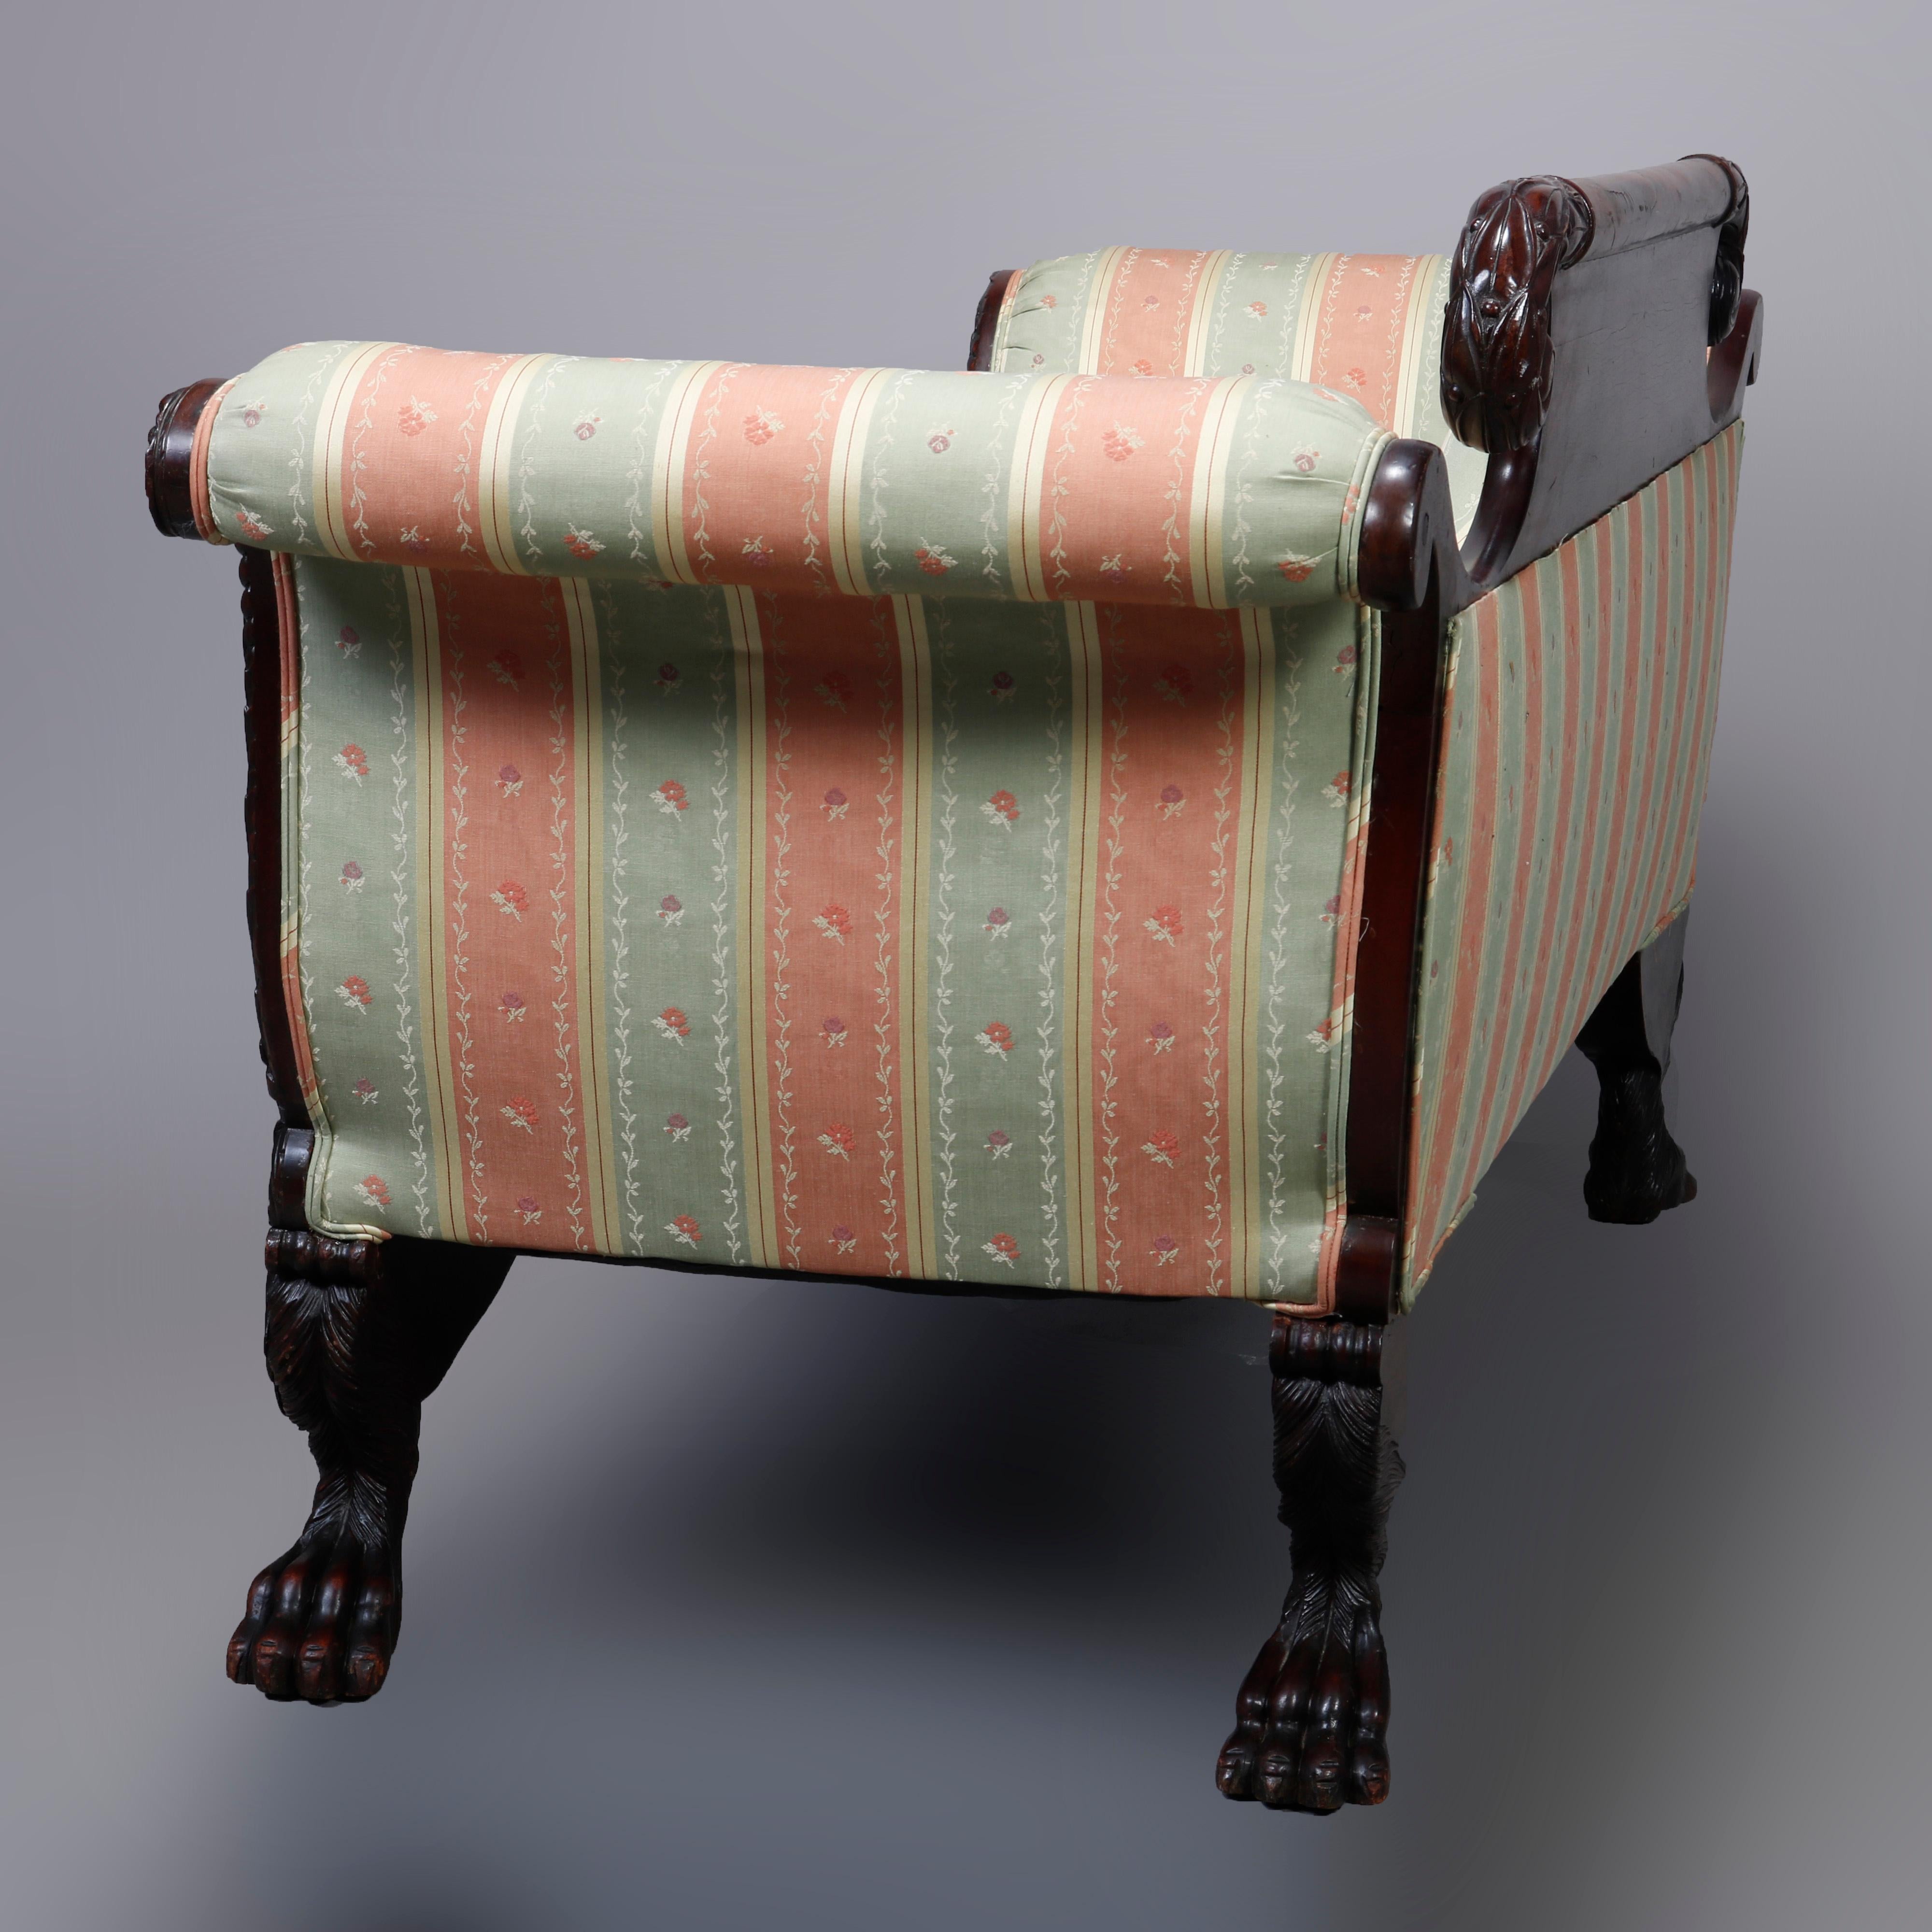 Upholstery Antique American Empire Classical Mahogany Scroll Arm Sofa, 19th Century